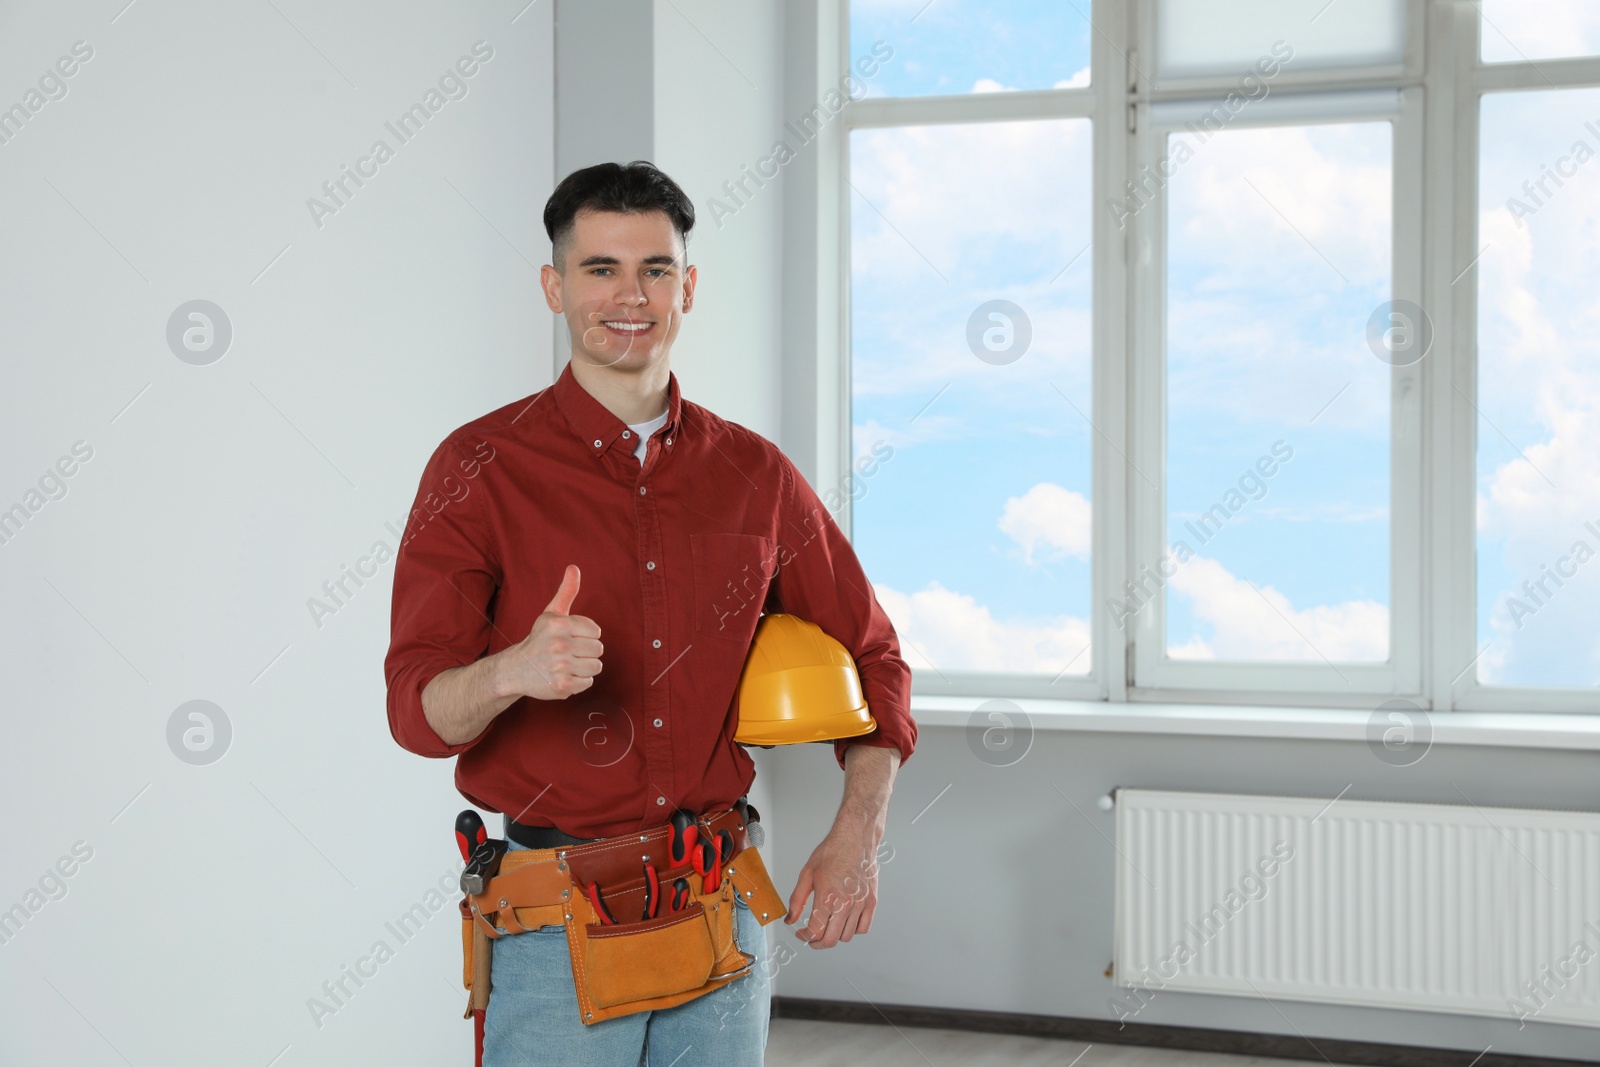 Photo of Handyman with hard hat and tool belt showing thumb up in empty room